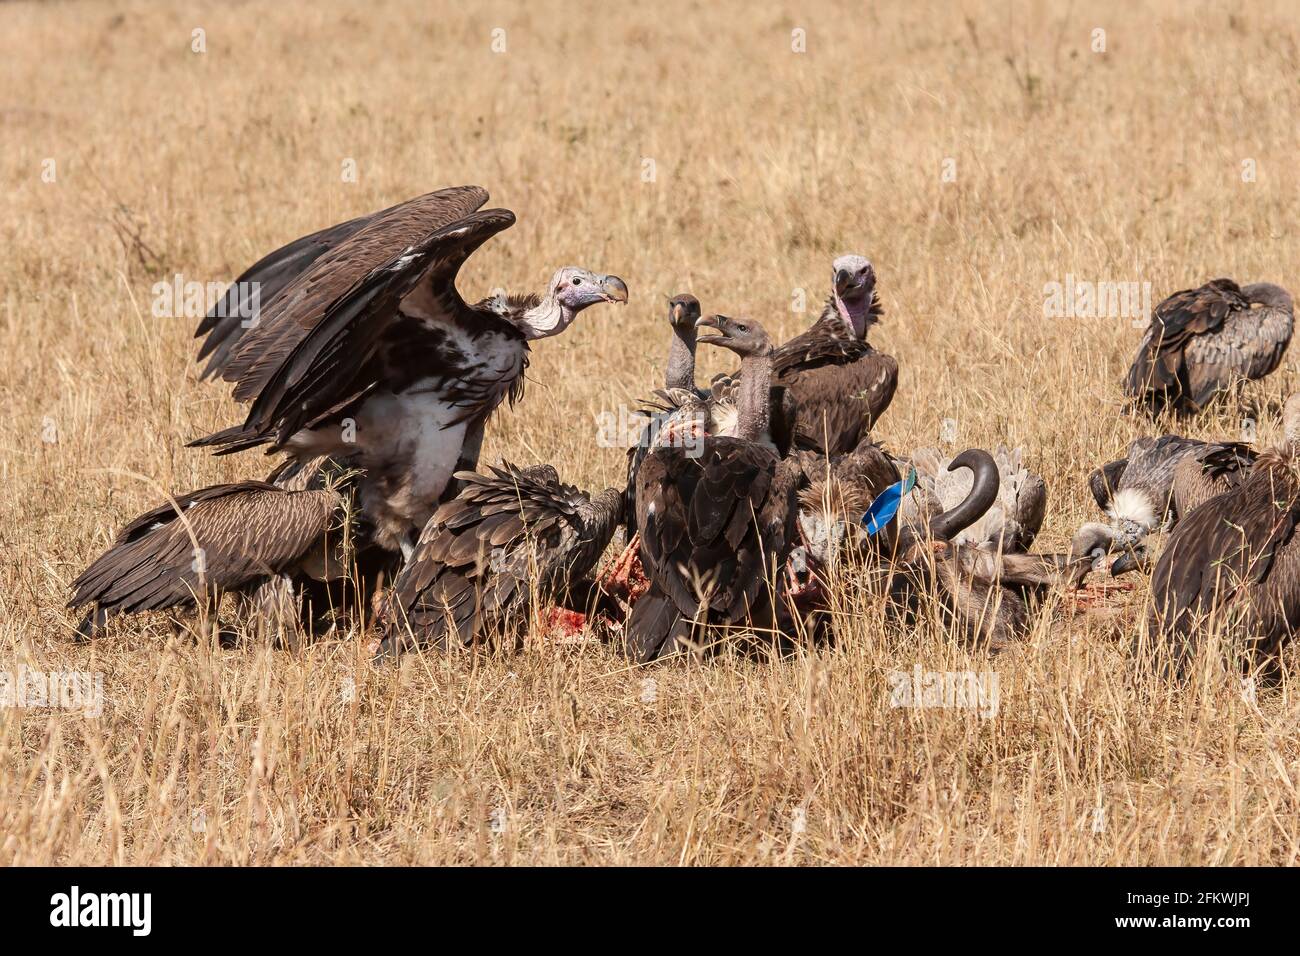 lappet-faced vulture or Nubian vulture, Torgos tracheliotos, two birds feeding on carcass with other vultures, Masai Mara, Kenya, East Africa Stock Photo